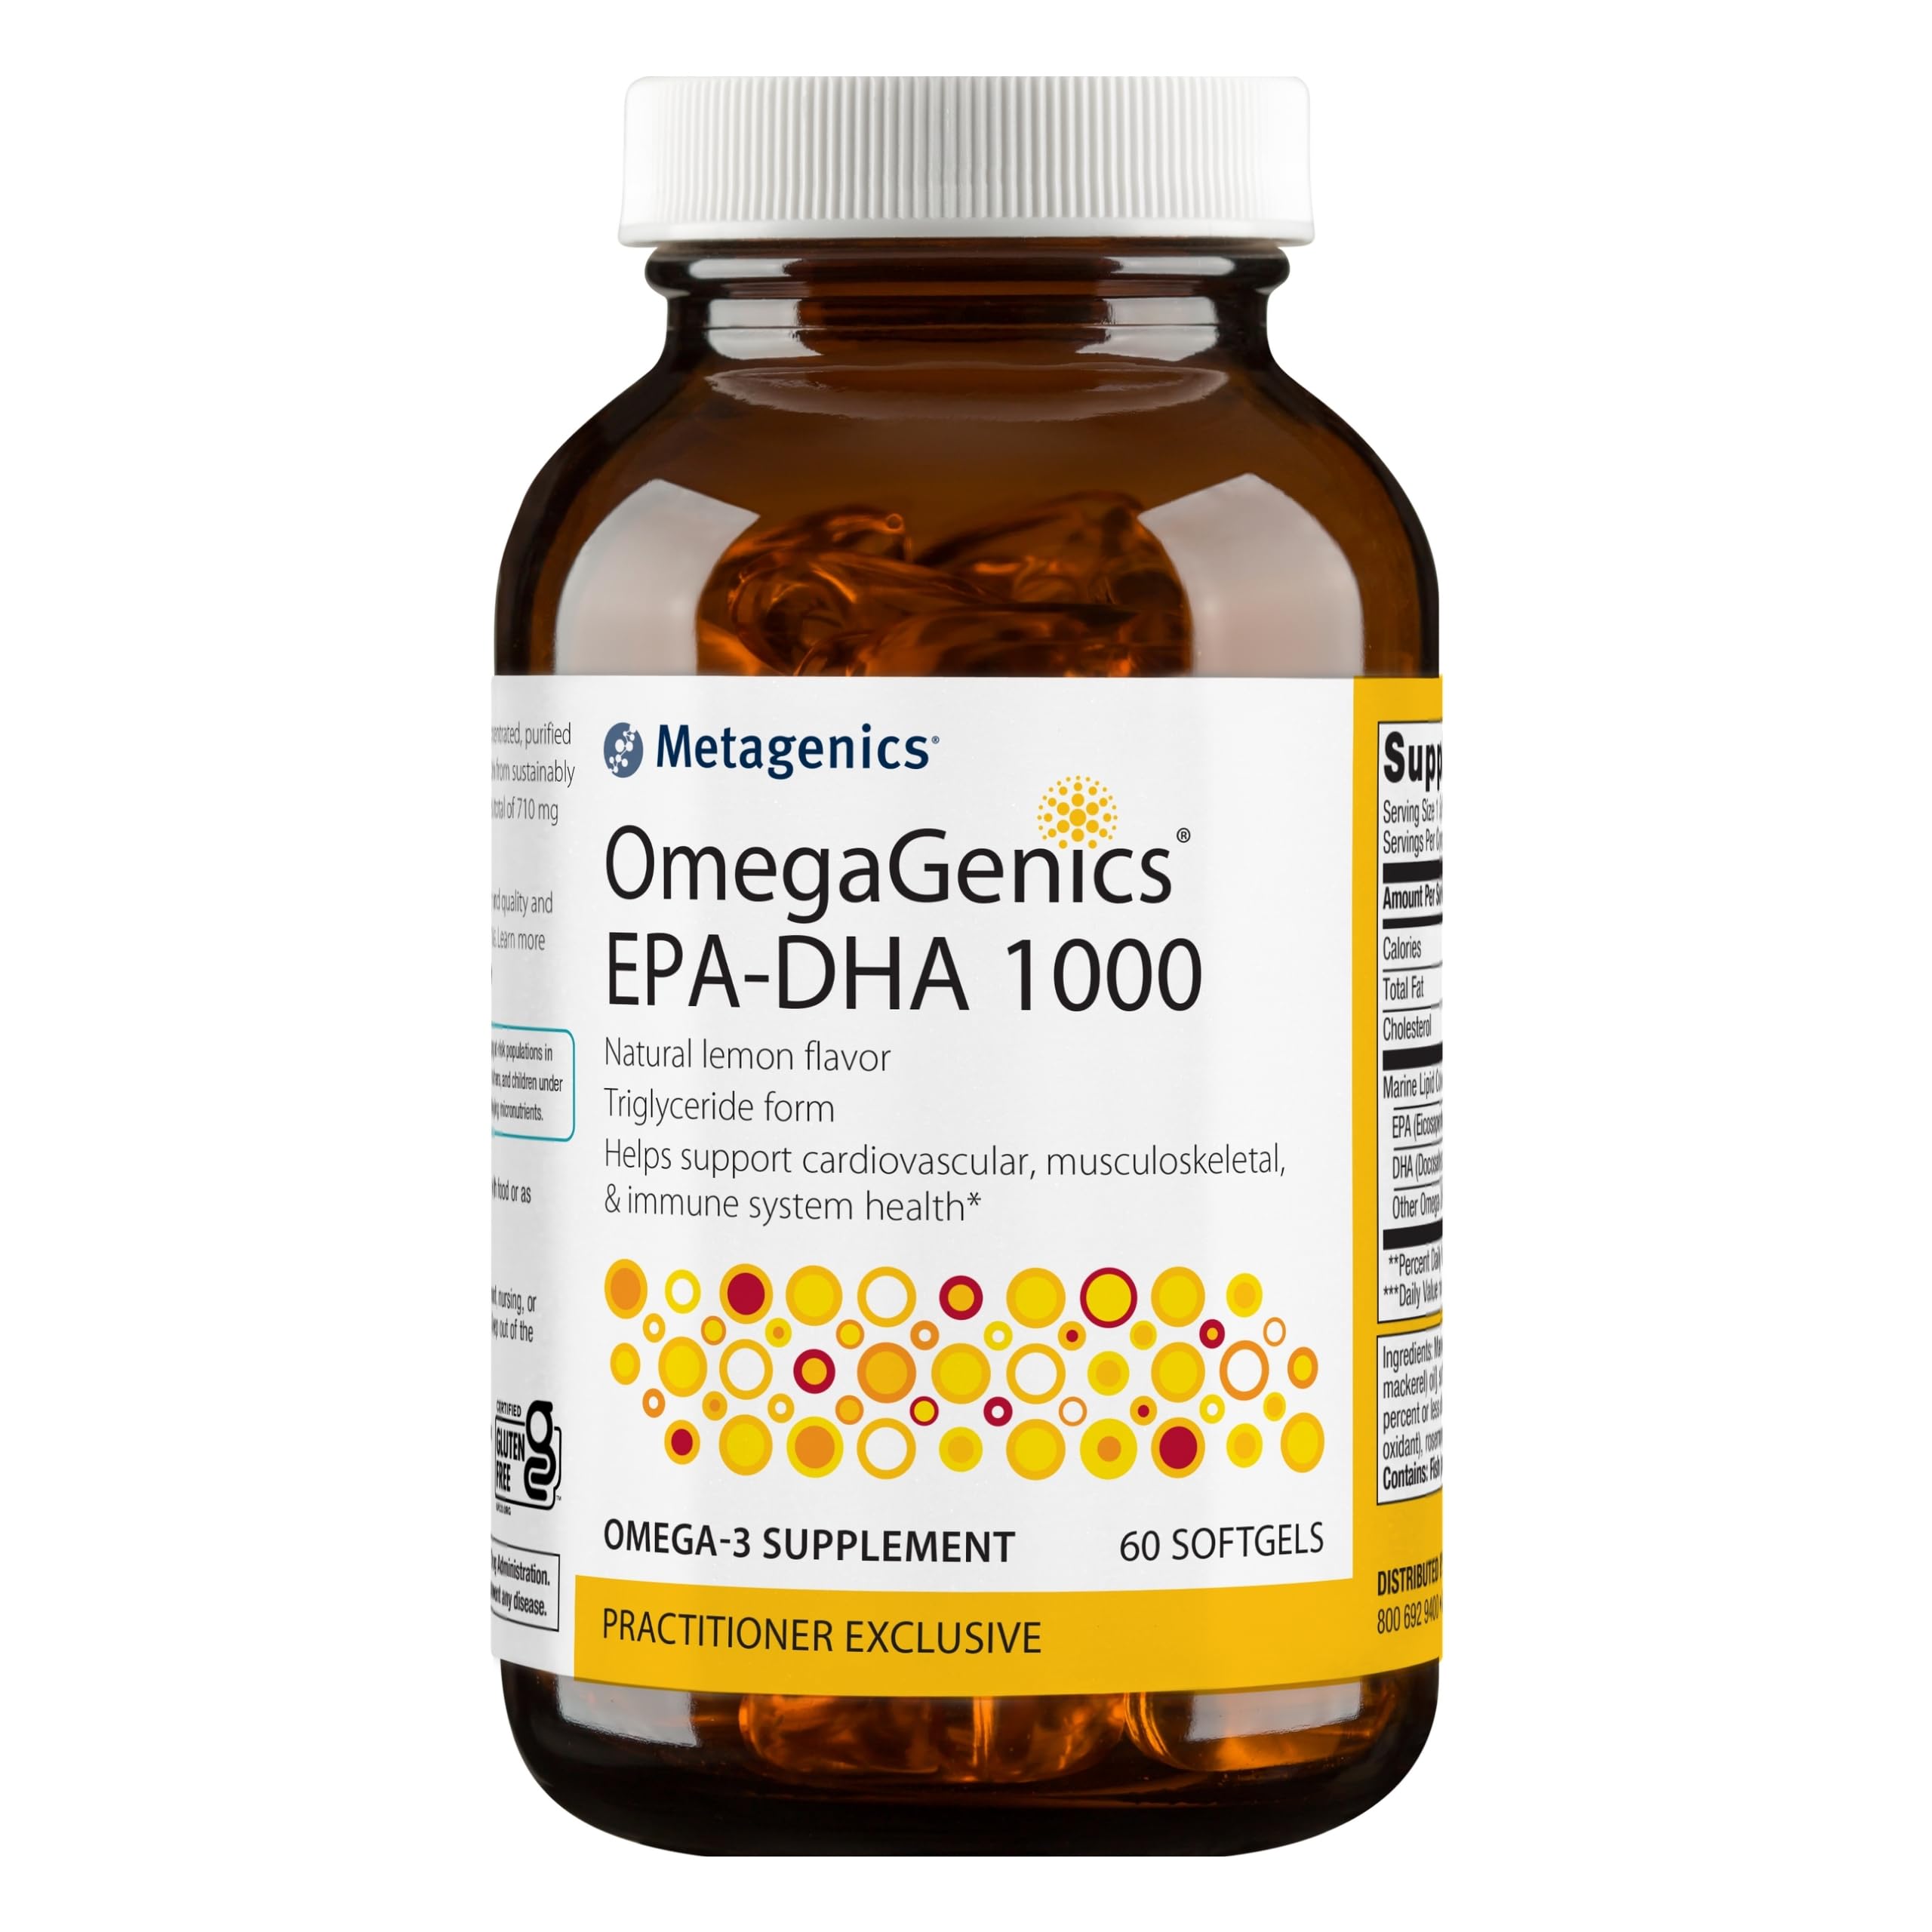 Metagenics OmegaGenics EPA-DHA 1000 - Omega-3 Fish Oil Supplement - for Heart Health, Musculoskeletal Health & Immune System Health* - with DHA & EPA - 60 Softgels